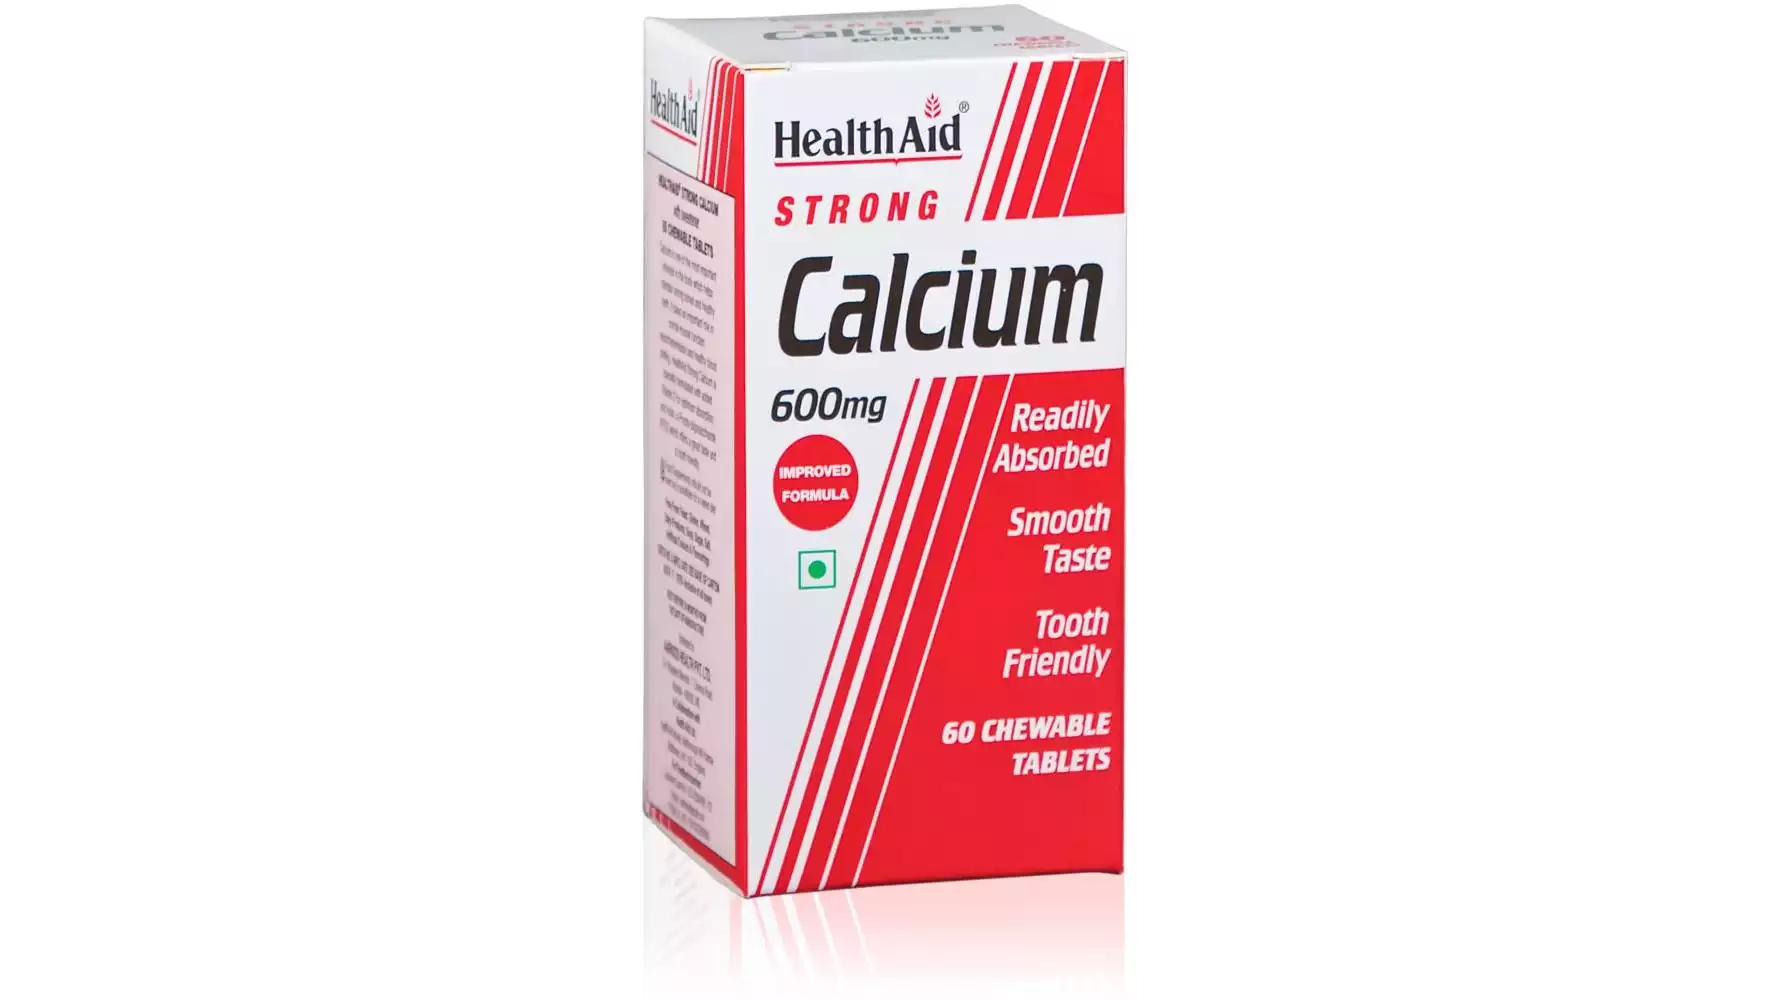 HealthAid Strong Calcium 600Mg Tablets (60tab)